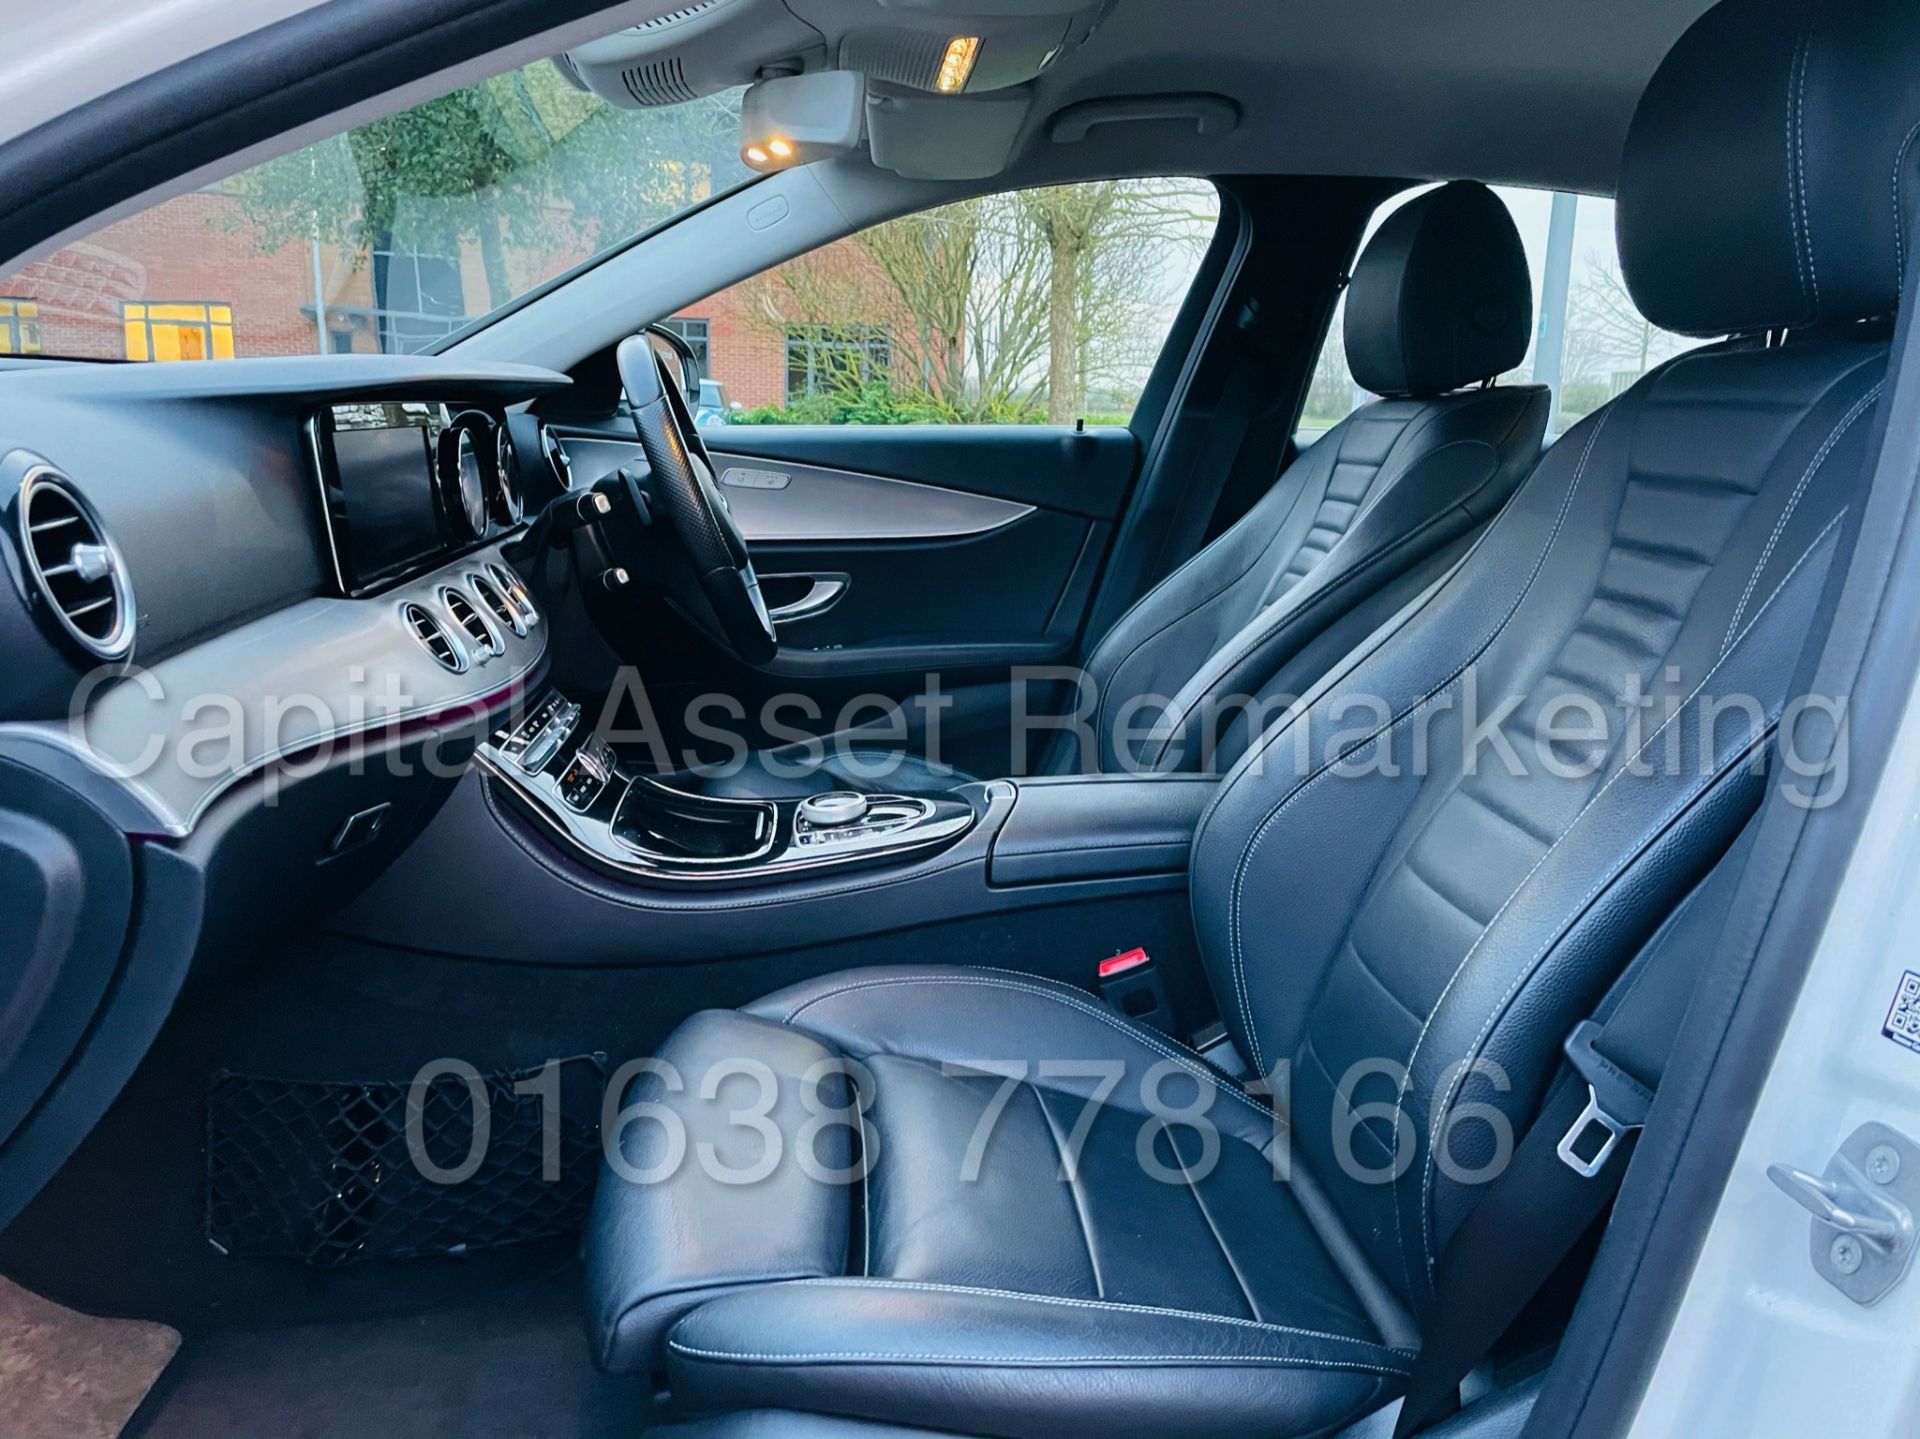 (ON SALE) MERCEDES-BENZ E220D *SALOON* (2018 - NEW MODEL) '9-G TRONIC AUTO - LEATHER - SAT NAV' - Image 24 of 50